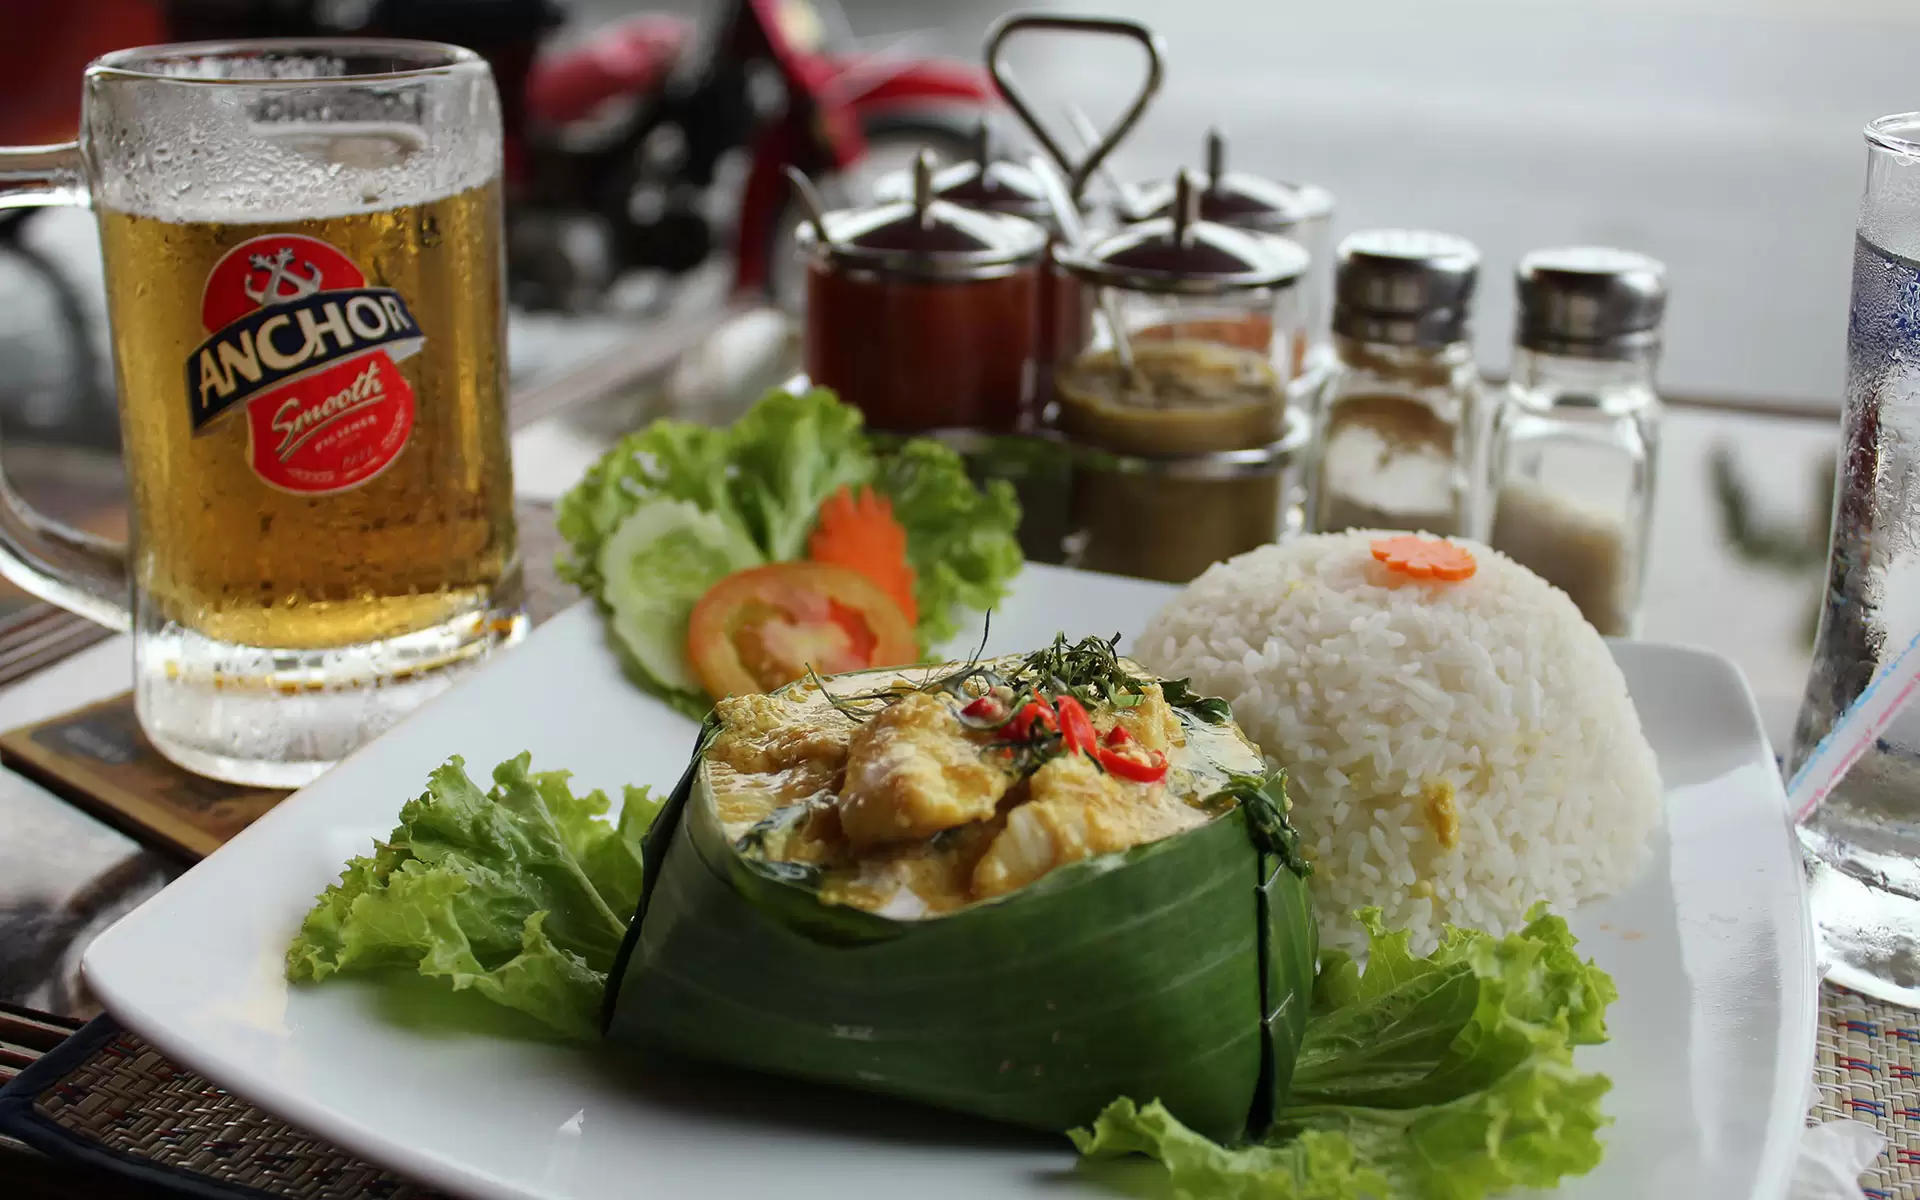 Cambodia Travel Guide - Where and What to Eat in Cambodia